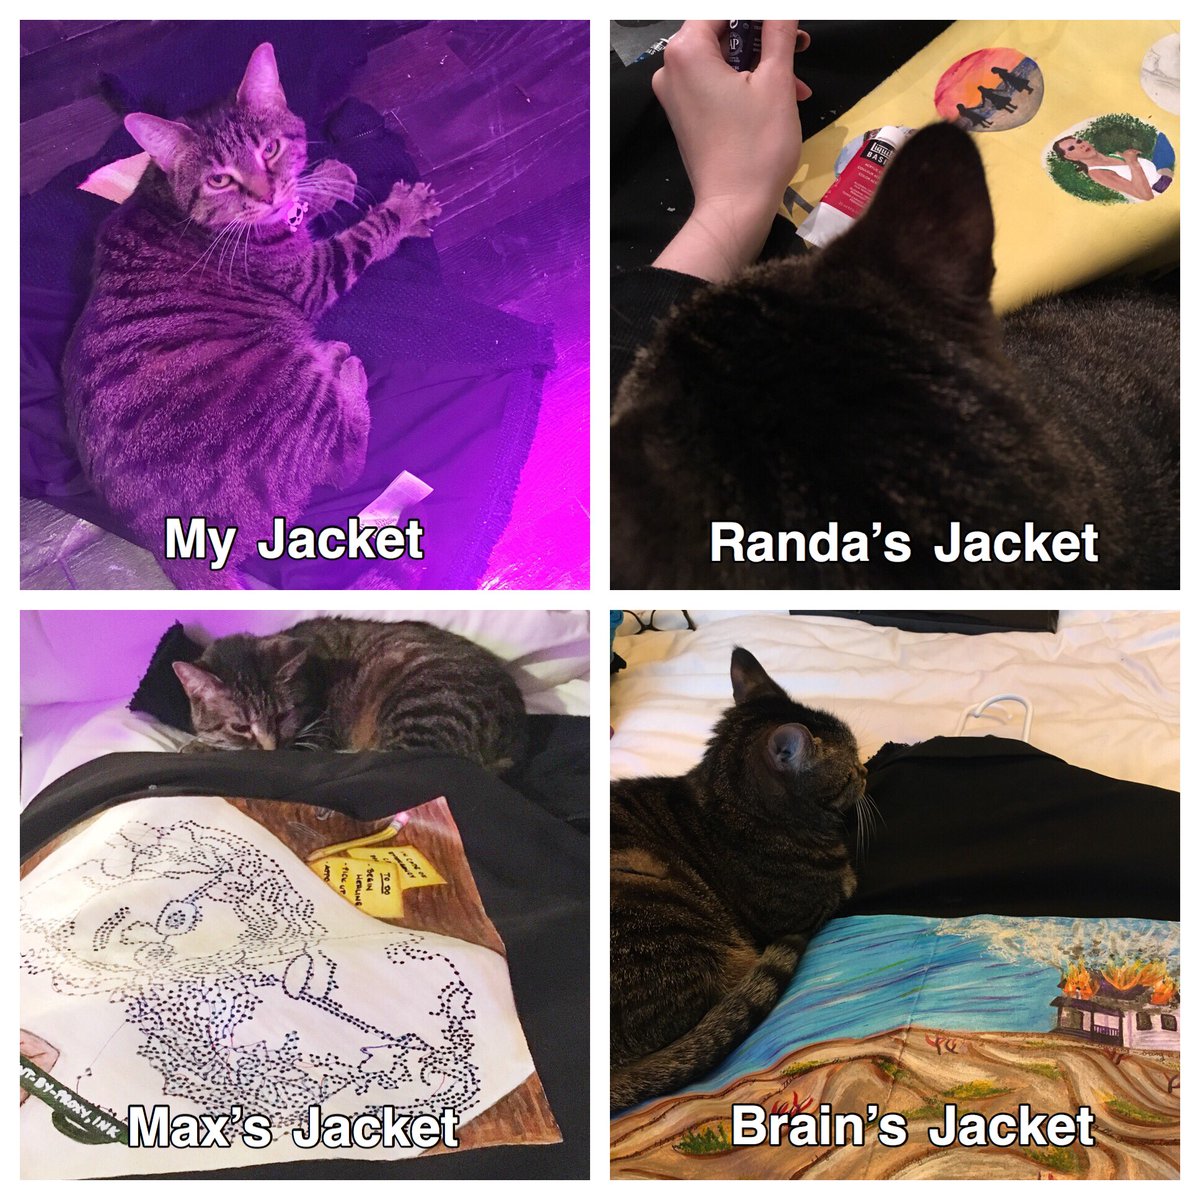 After painting four jackets, it’s clear to me that my cat has anointed herself guardian of #TheWalkingGallery.